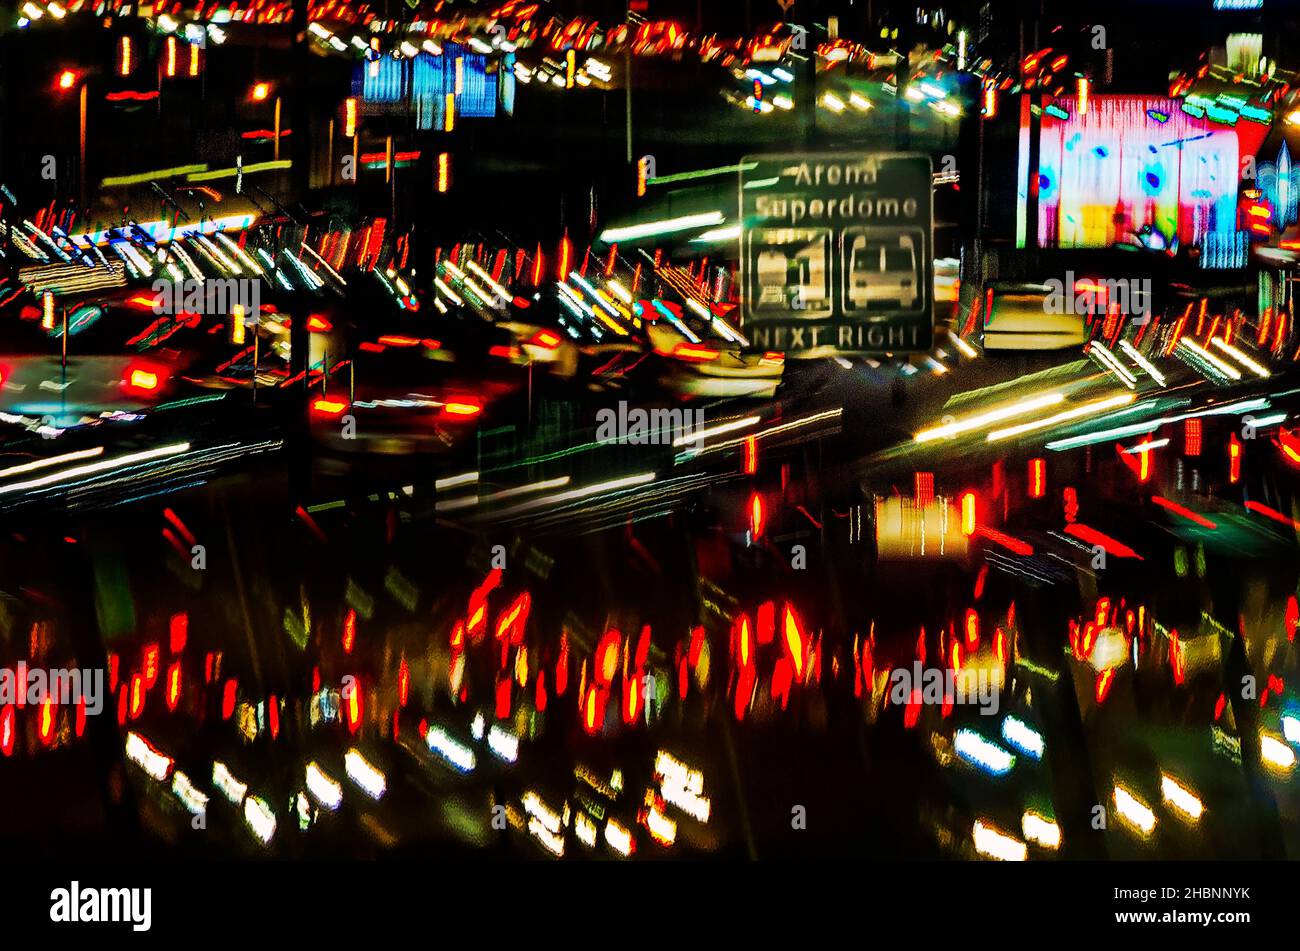 Pontchartrain Expressway is pictured near the Louisiana Superdome during evening rush hour, Dec. 14, 2021, in New Orleans, Louisiana. Stock Photo